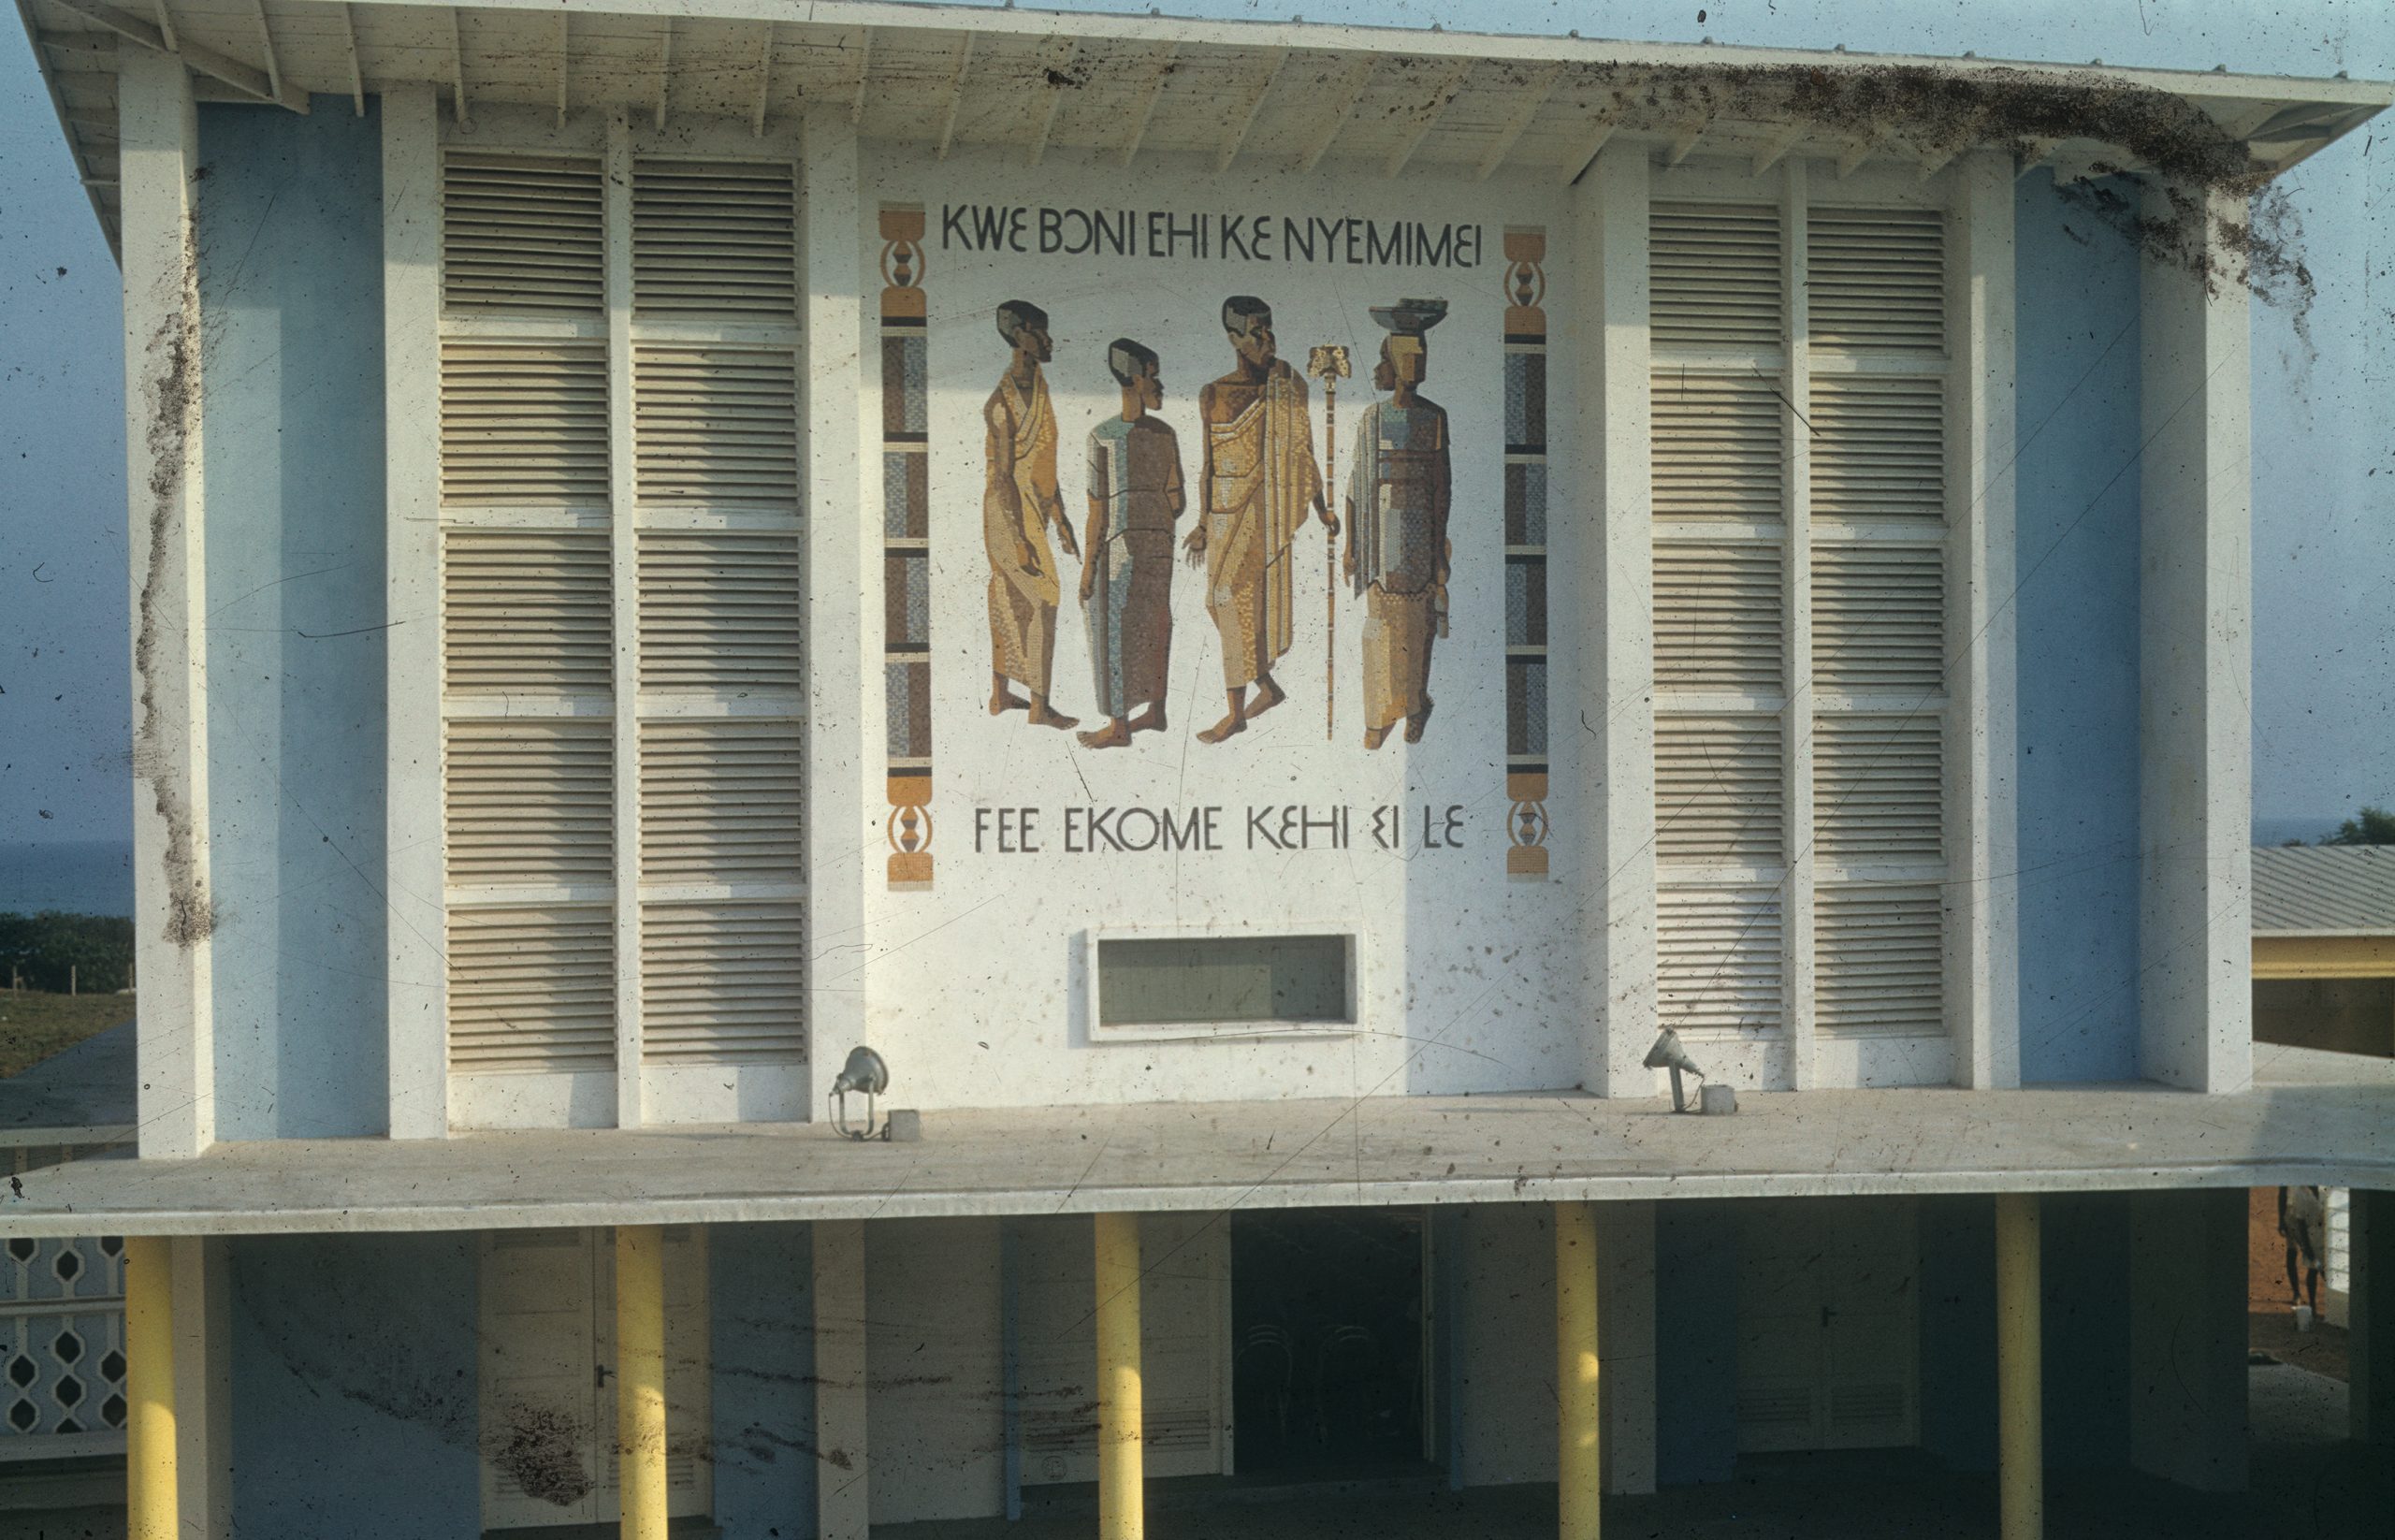 A mural showing four people